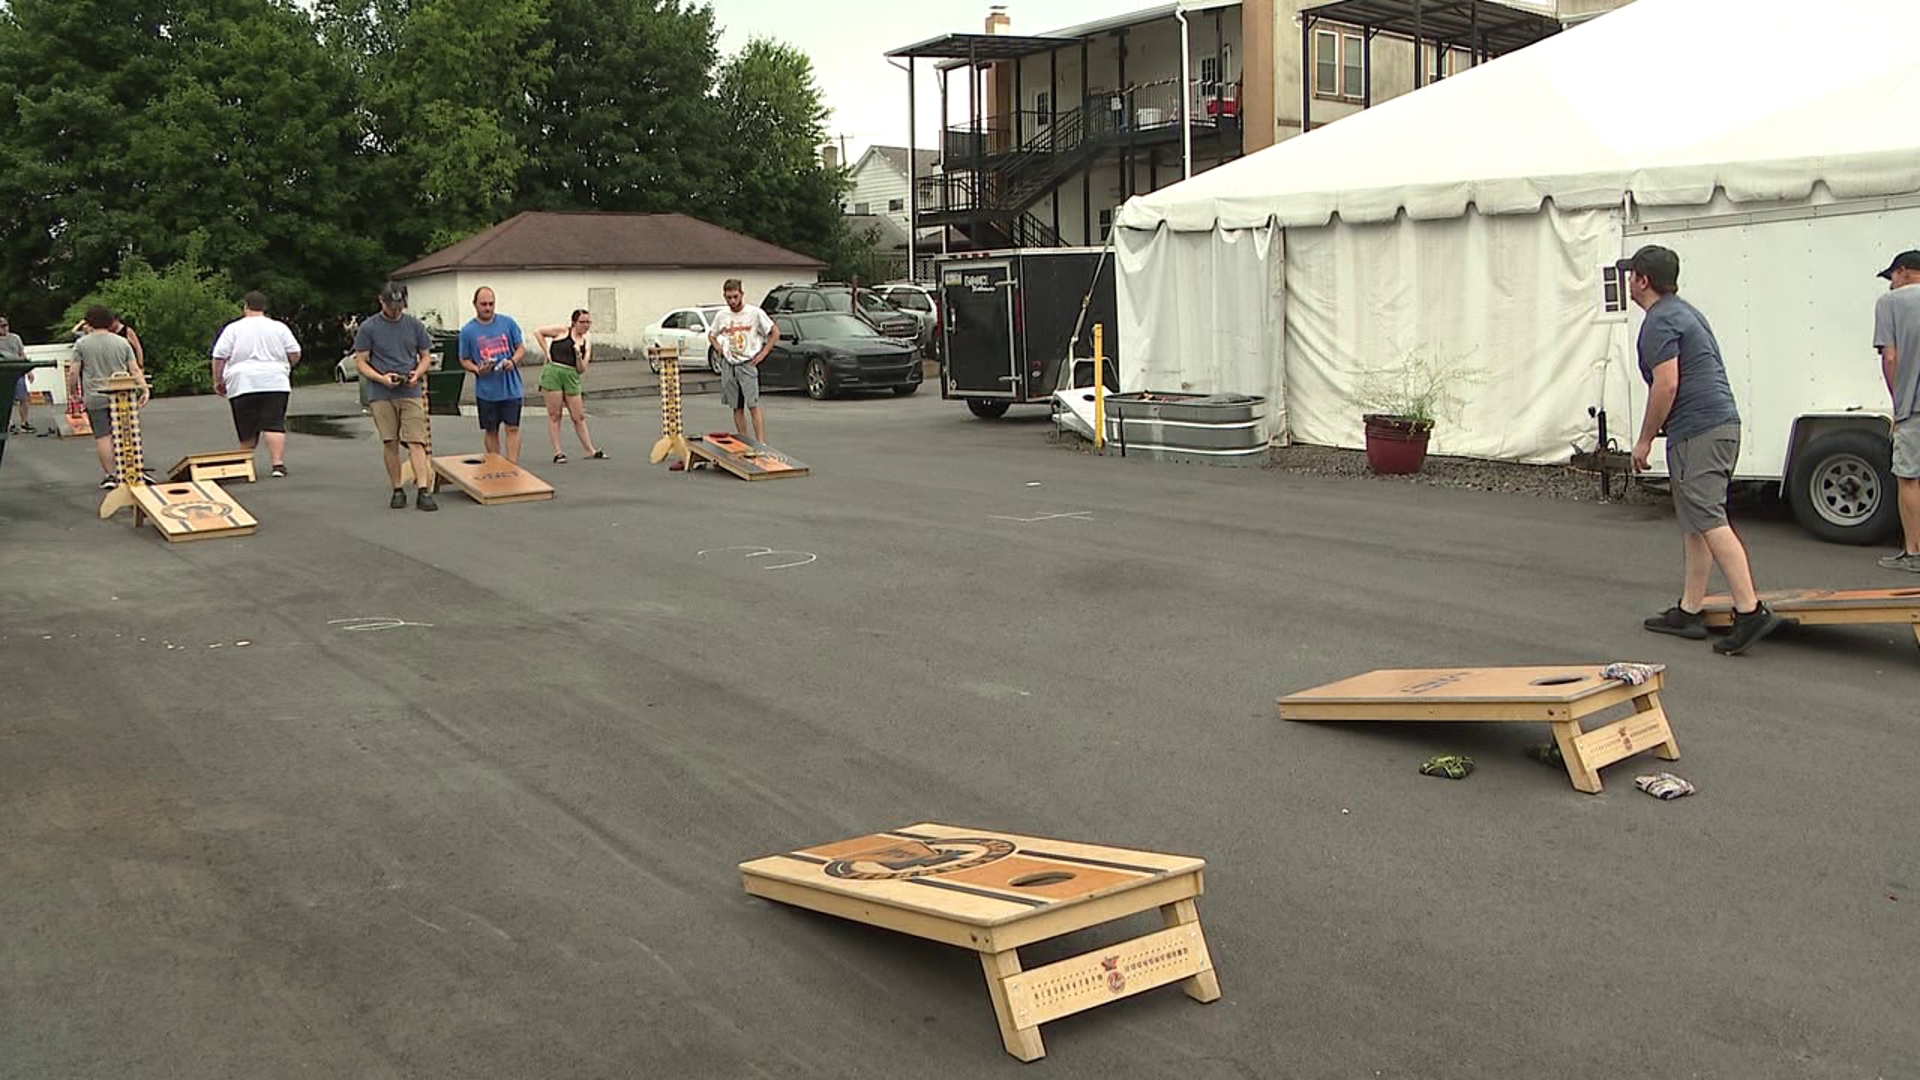 Revello's held the 3rd annual Old Forge Fire Department Cornhole Tournament.